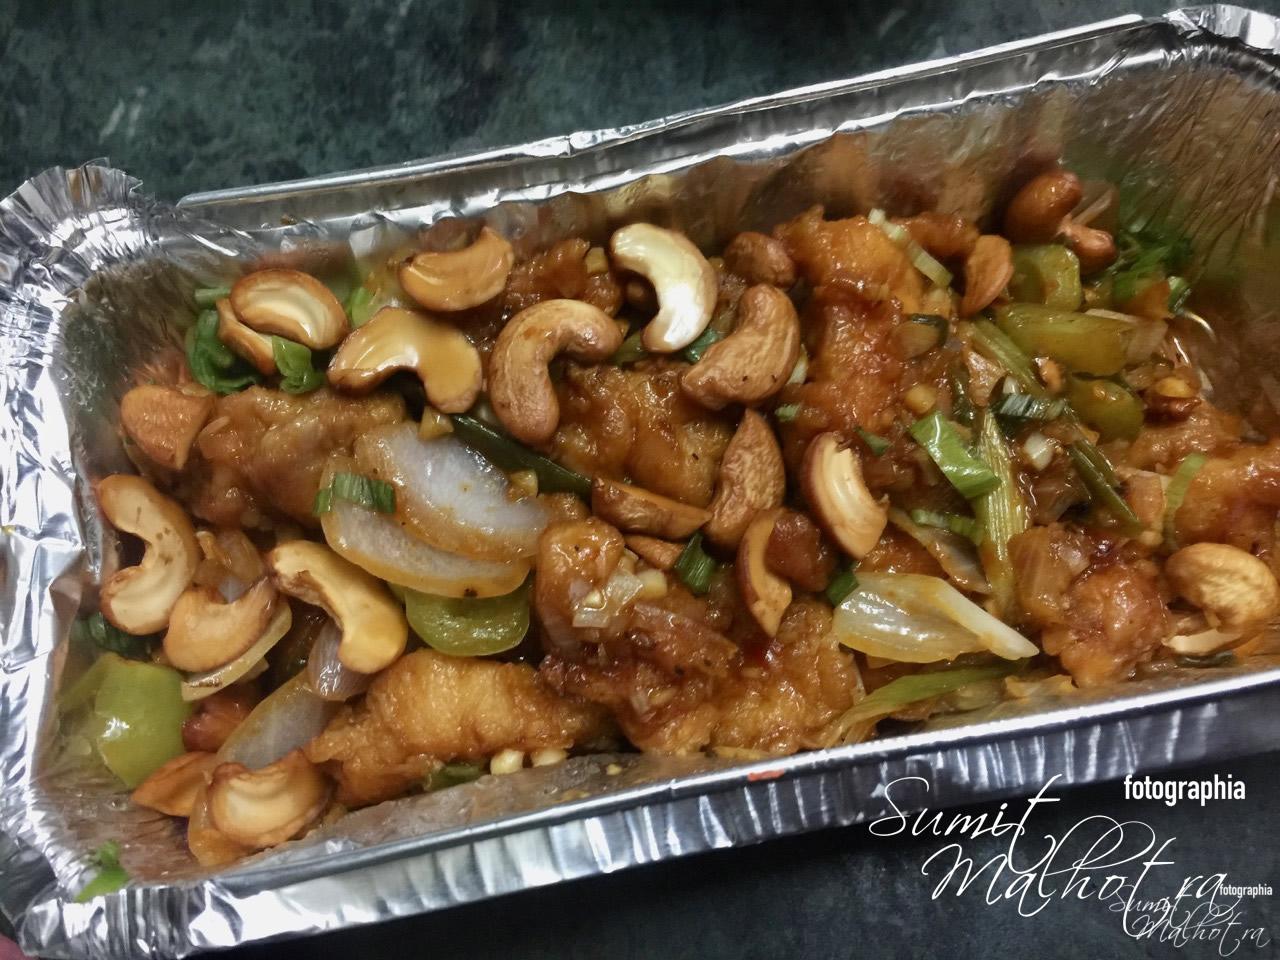 Crispy chicken with smoked chilli, ginger and cashewnuts.